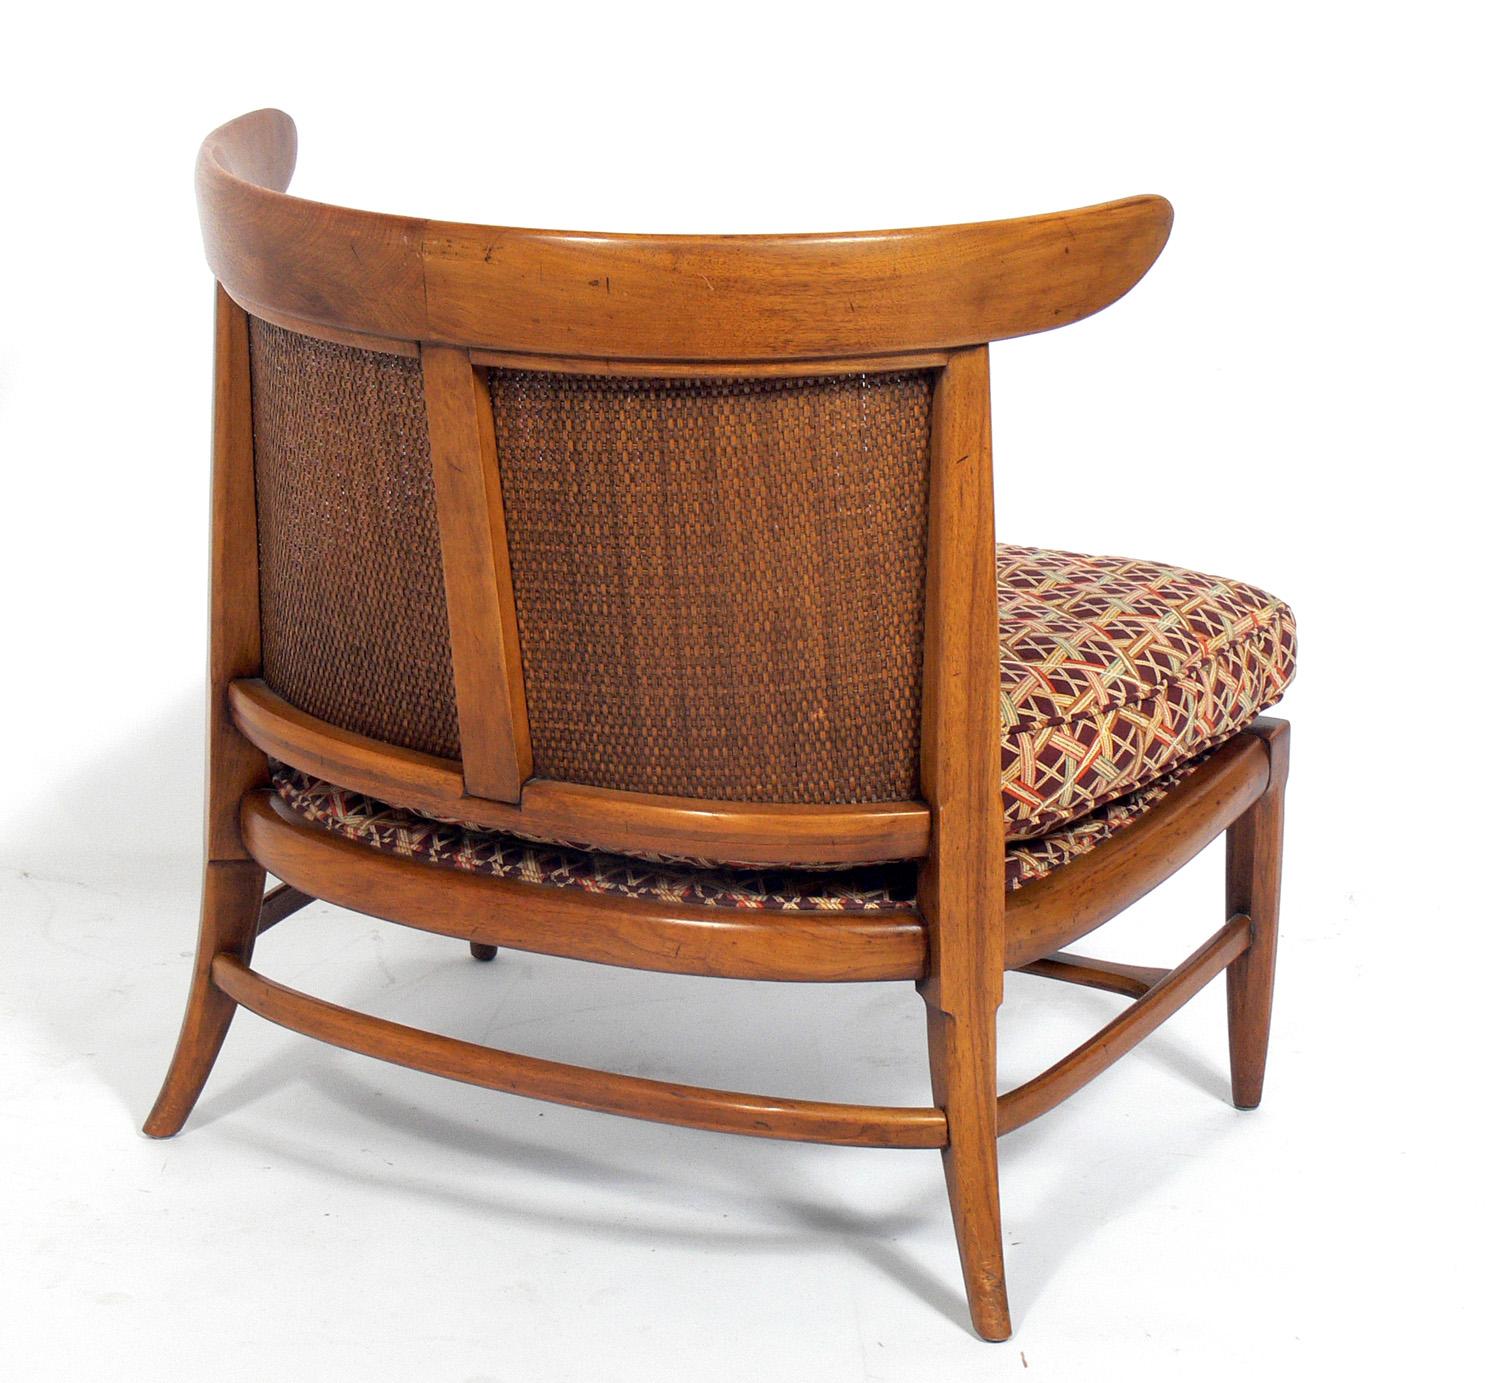 American Pair of Curvaceous Caned Back Slipper Chairs by Lubberts & Mulder for Tomlinson